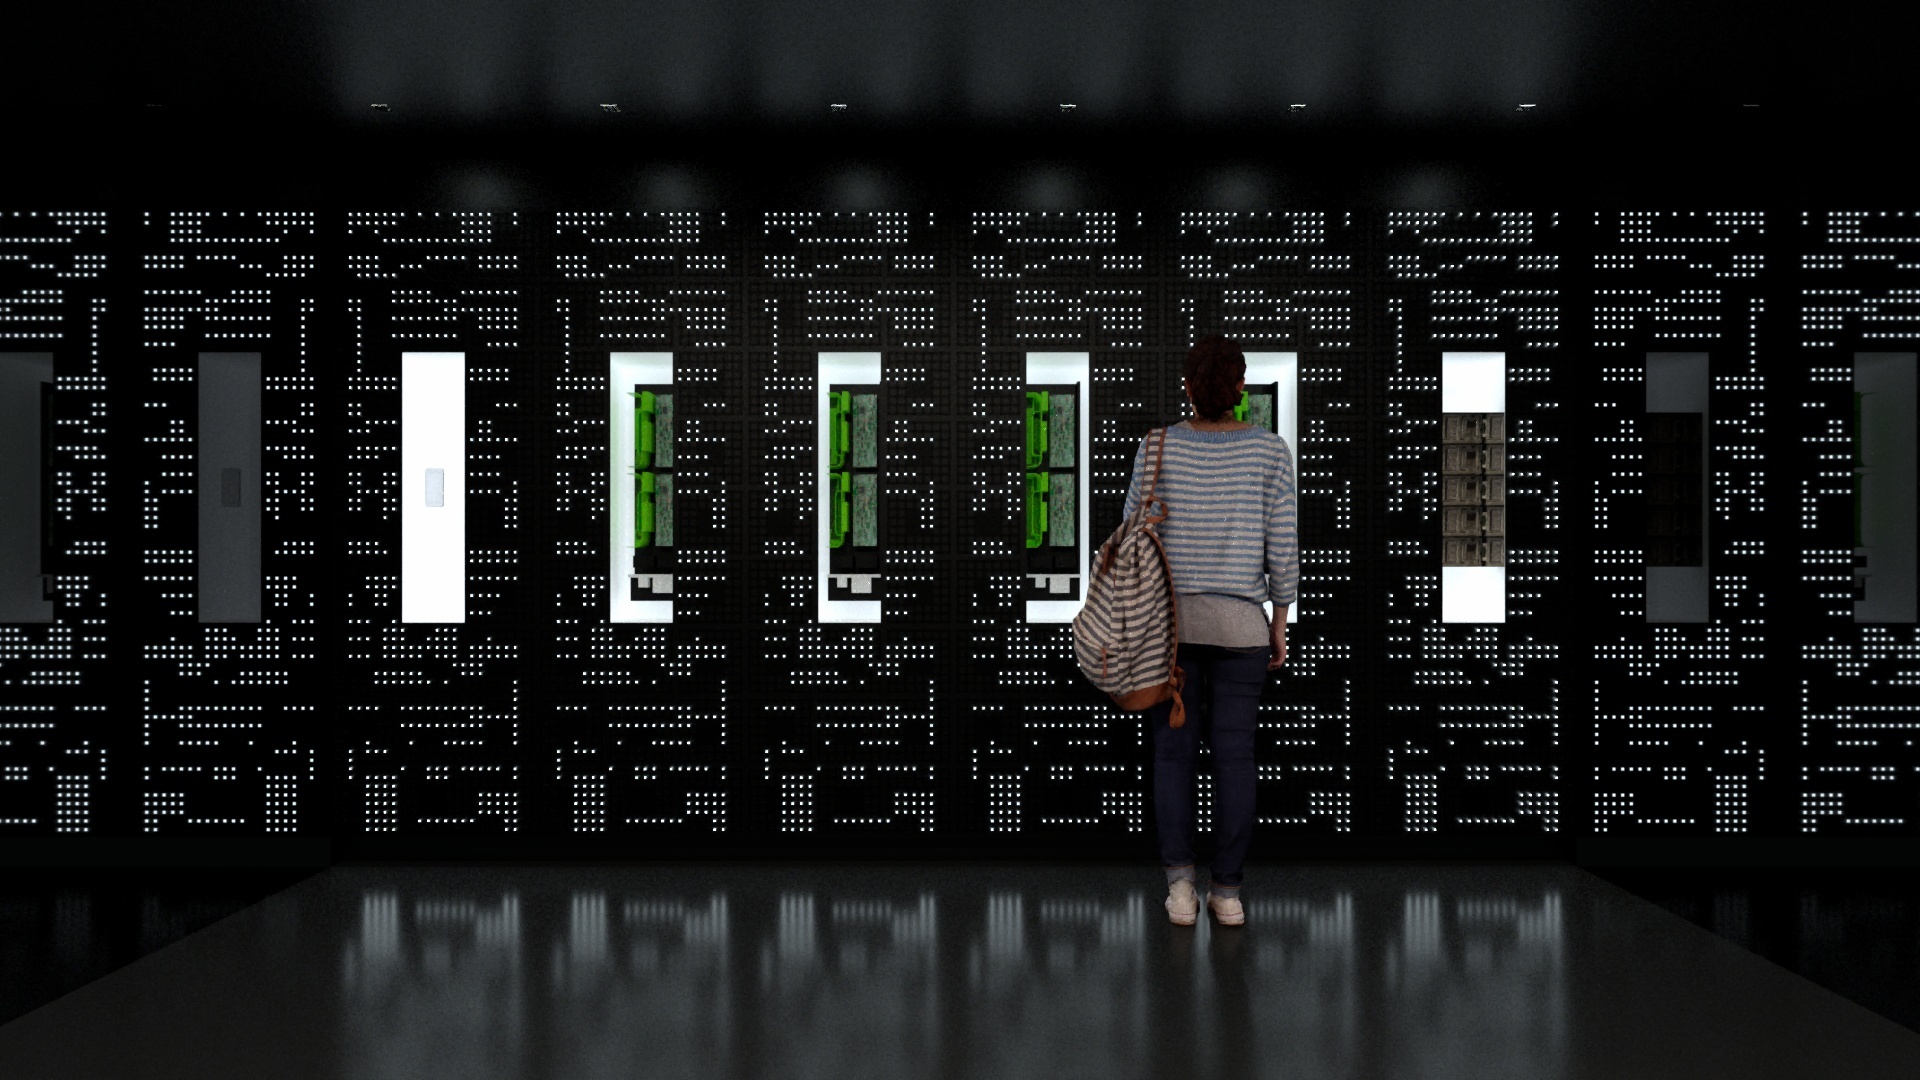 Render of individual standing in front of wall with computerized geometric visuals created by light